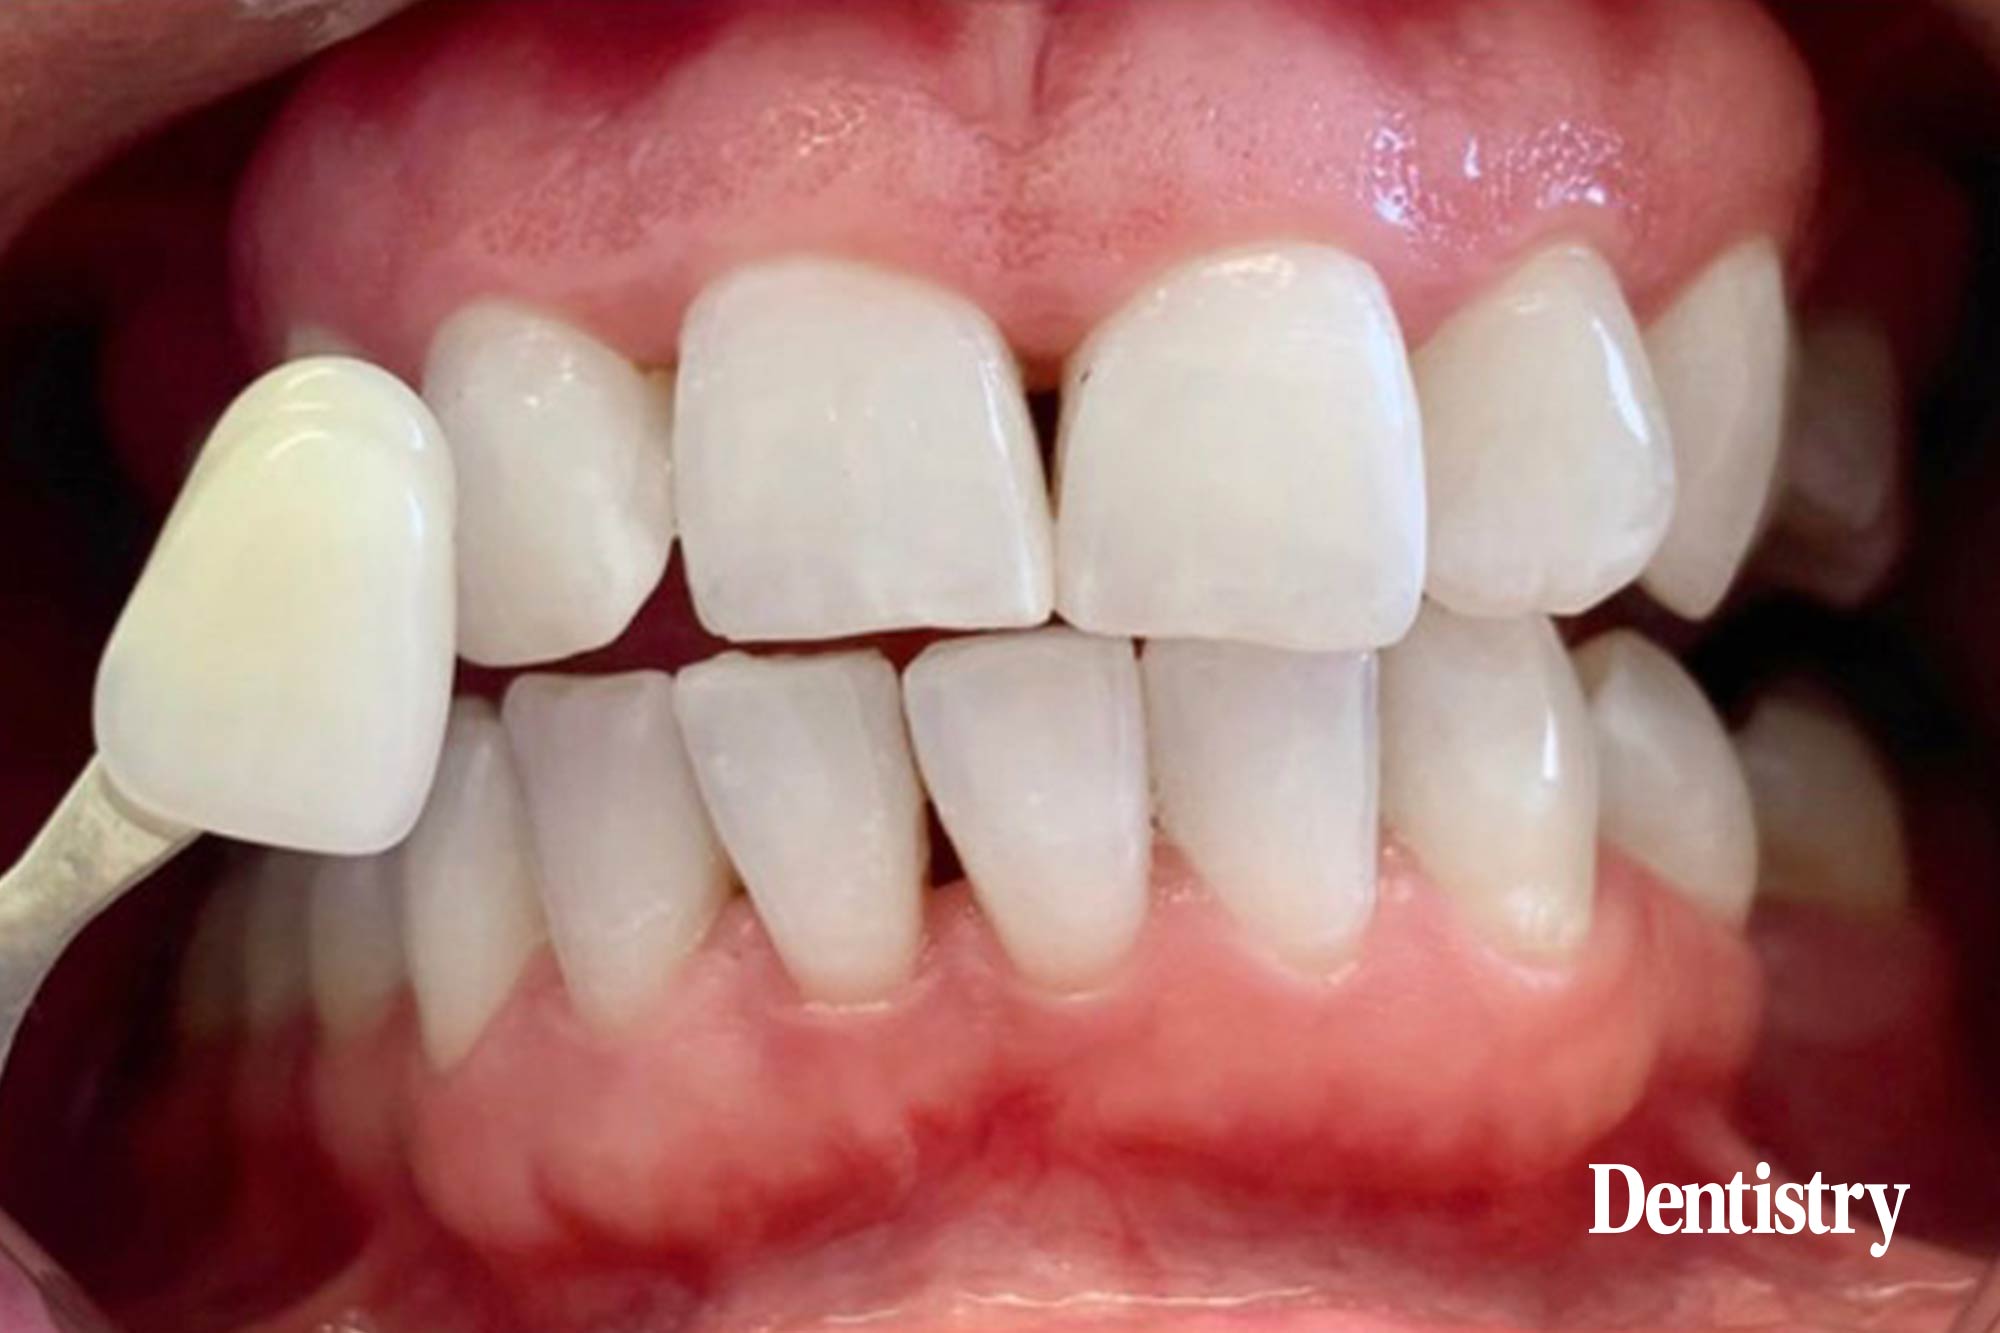 Melica Bastani, an award winning dental hygienist, presents an anxious and periodontally compromised tooth whitening case study for a patient ahead of her wedding. 